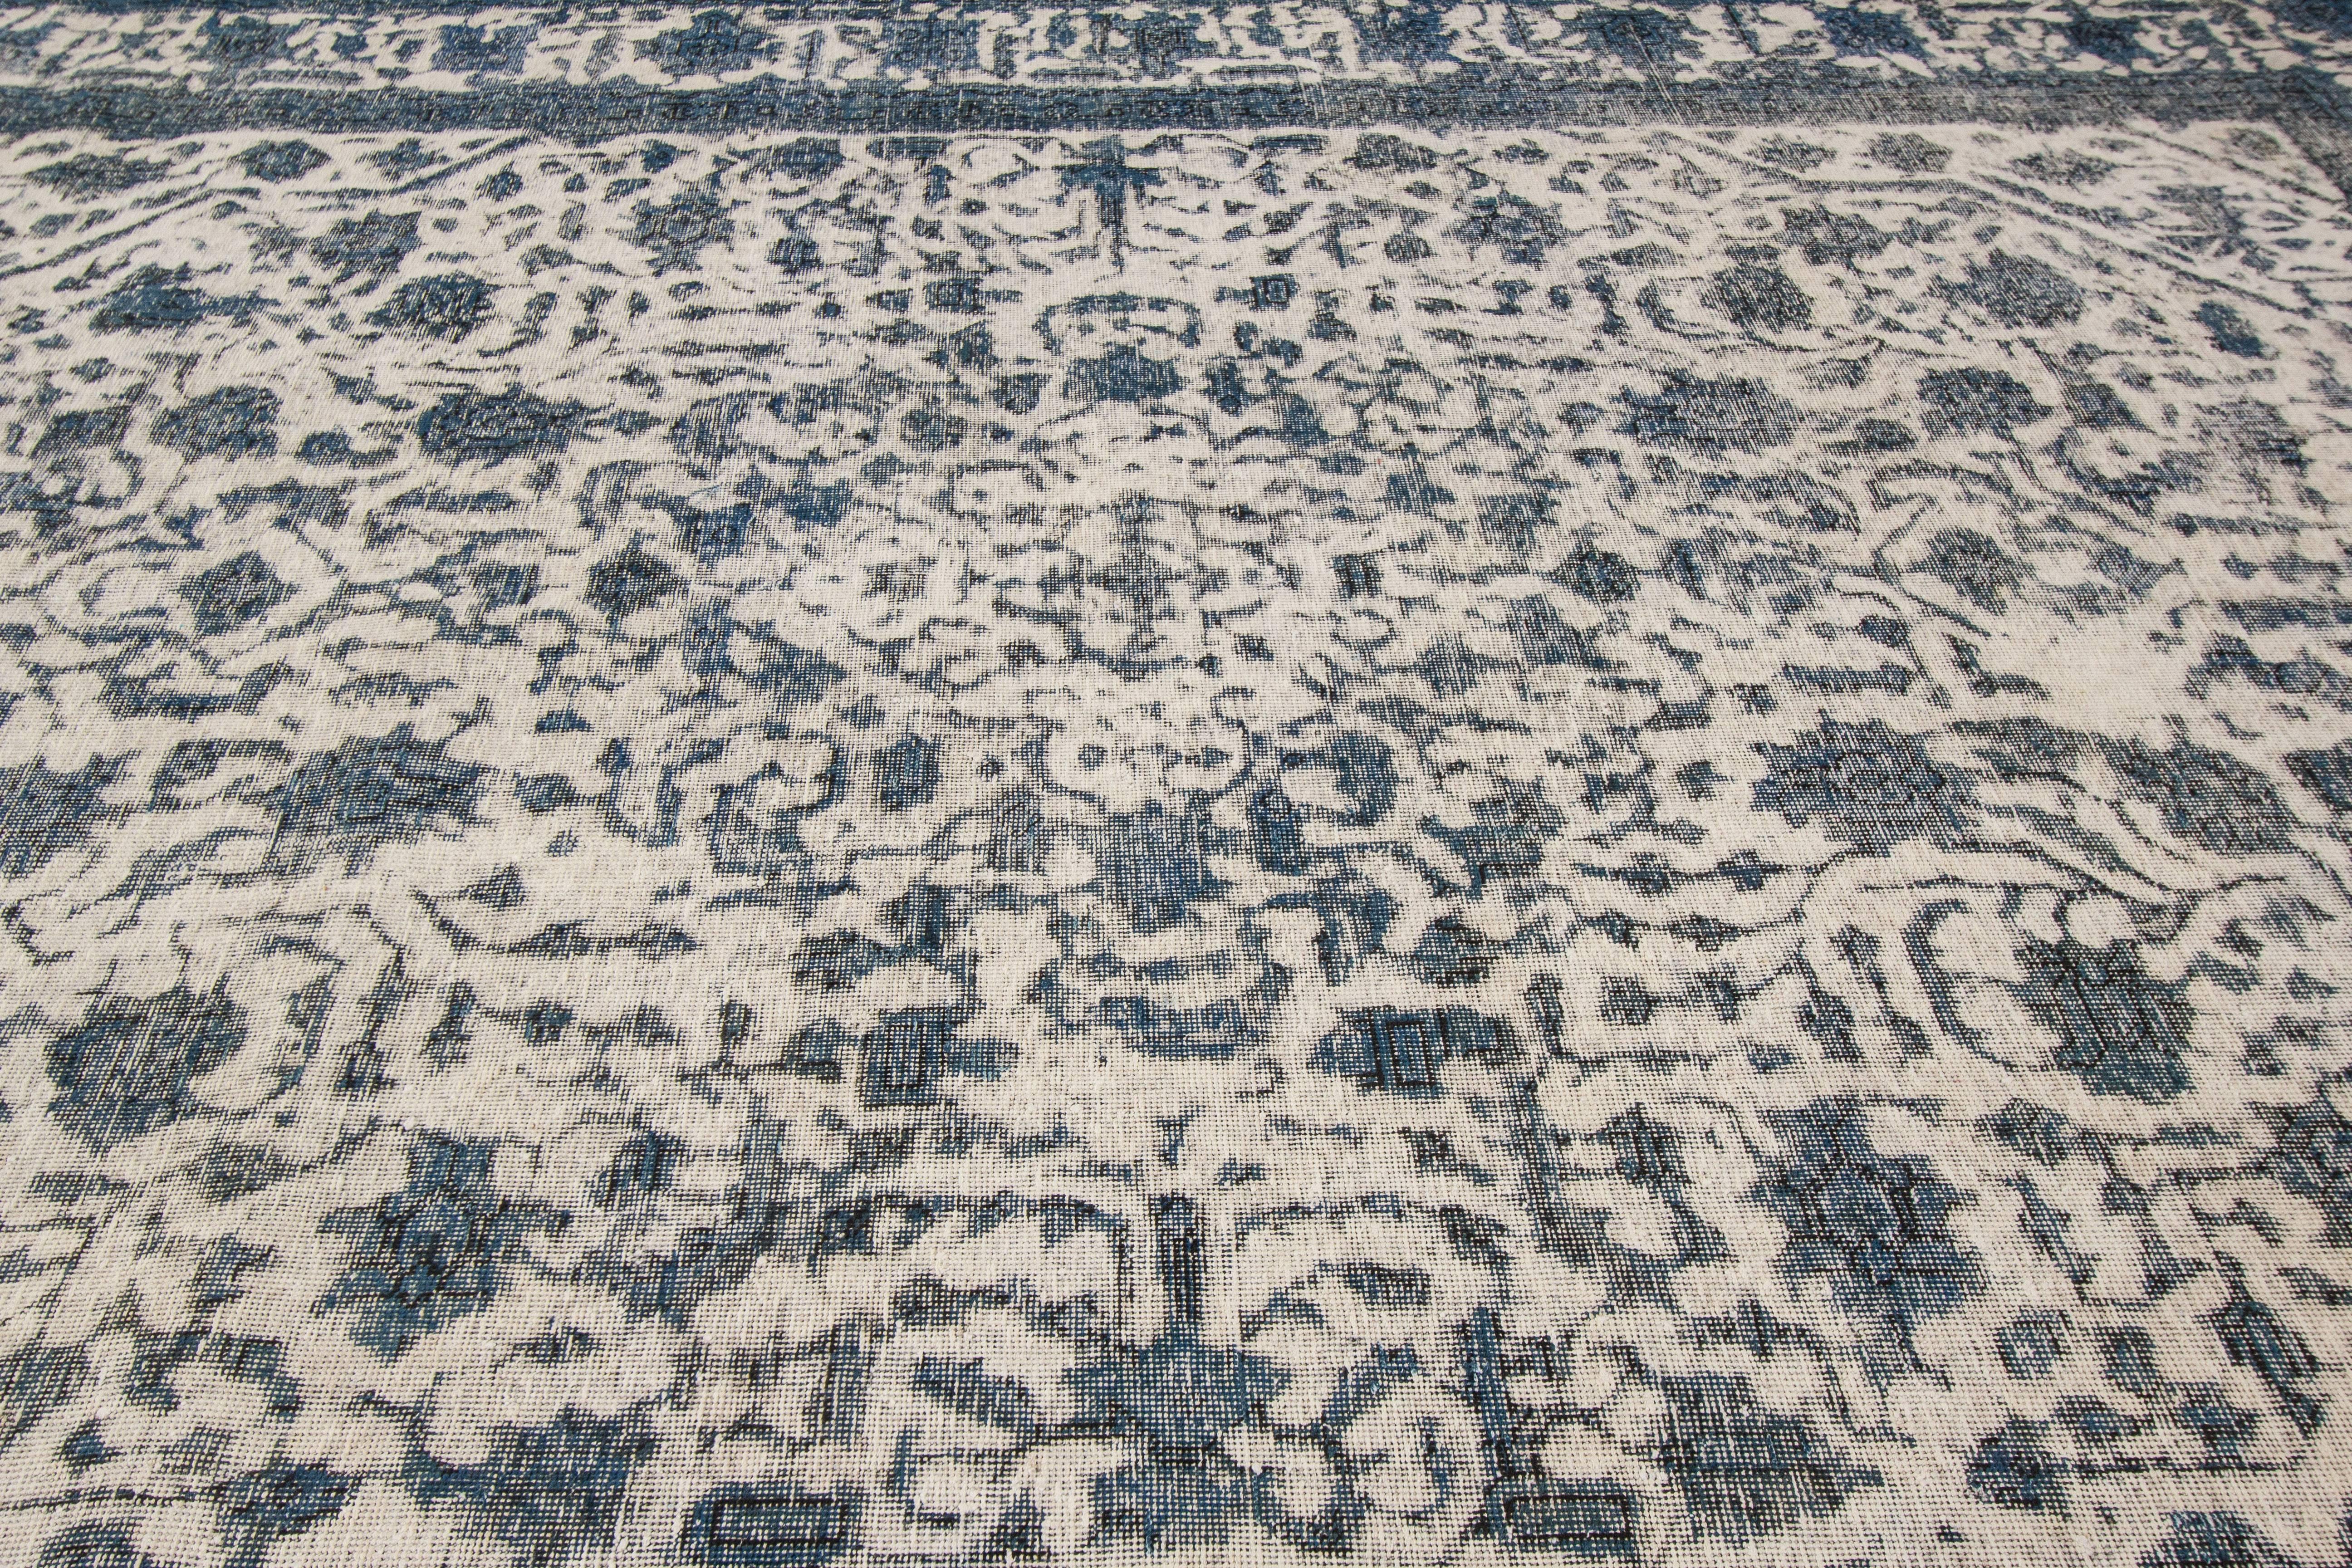 21st century contemporary (2000) Pakistani rug with an ivory field and teal/blue overdyed all-over design. Measures 9.09x12.08.